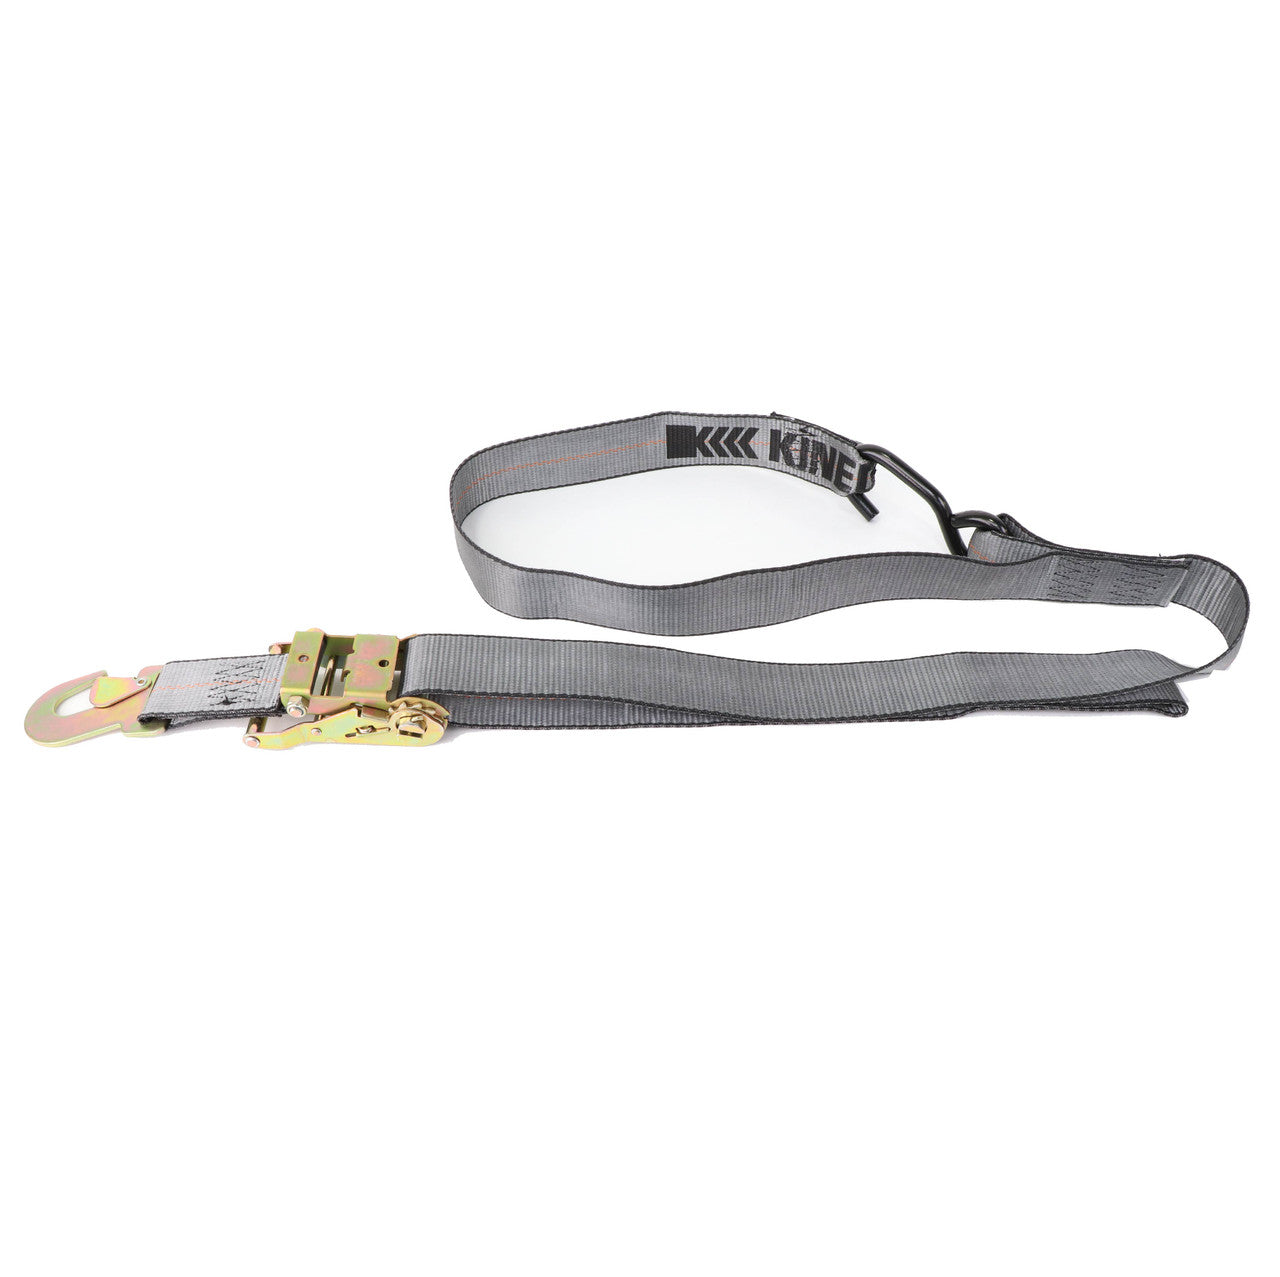 Kinedyne Pair of 2" by 6' S Hook and Snap Hook Ratchet Straps